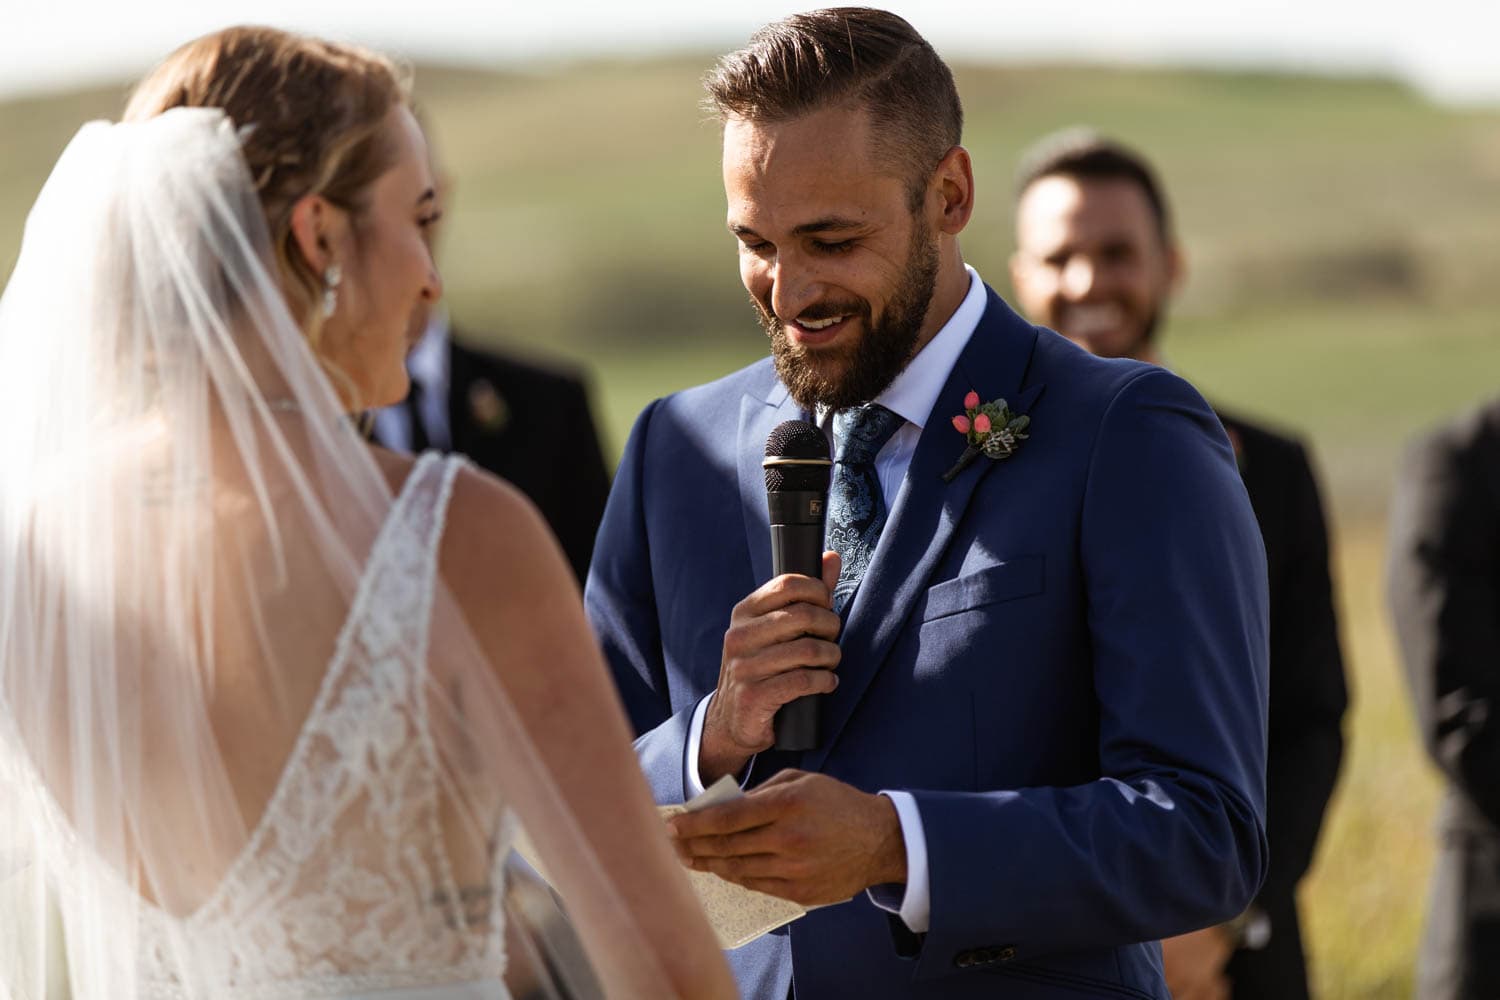 groom reading vows at wedding ceremony